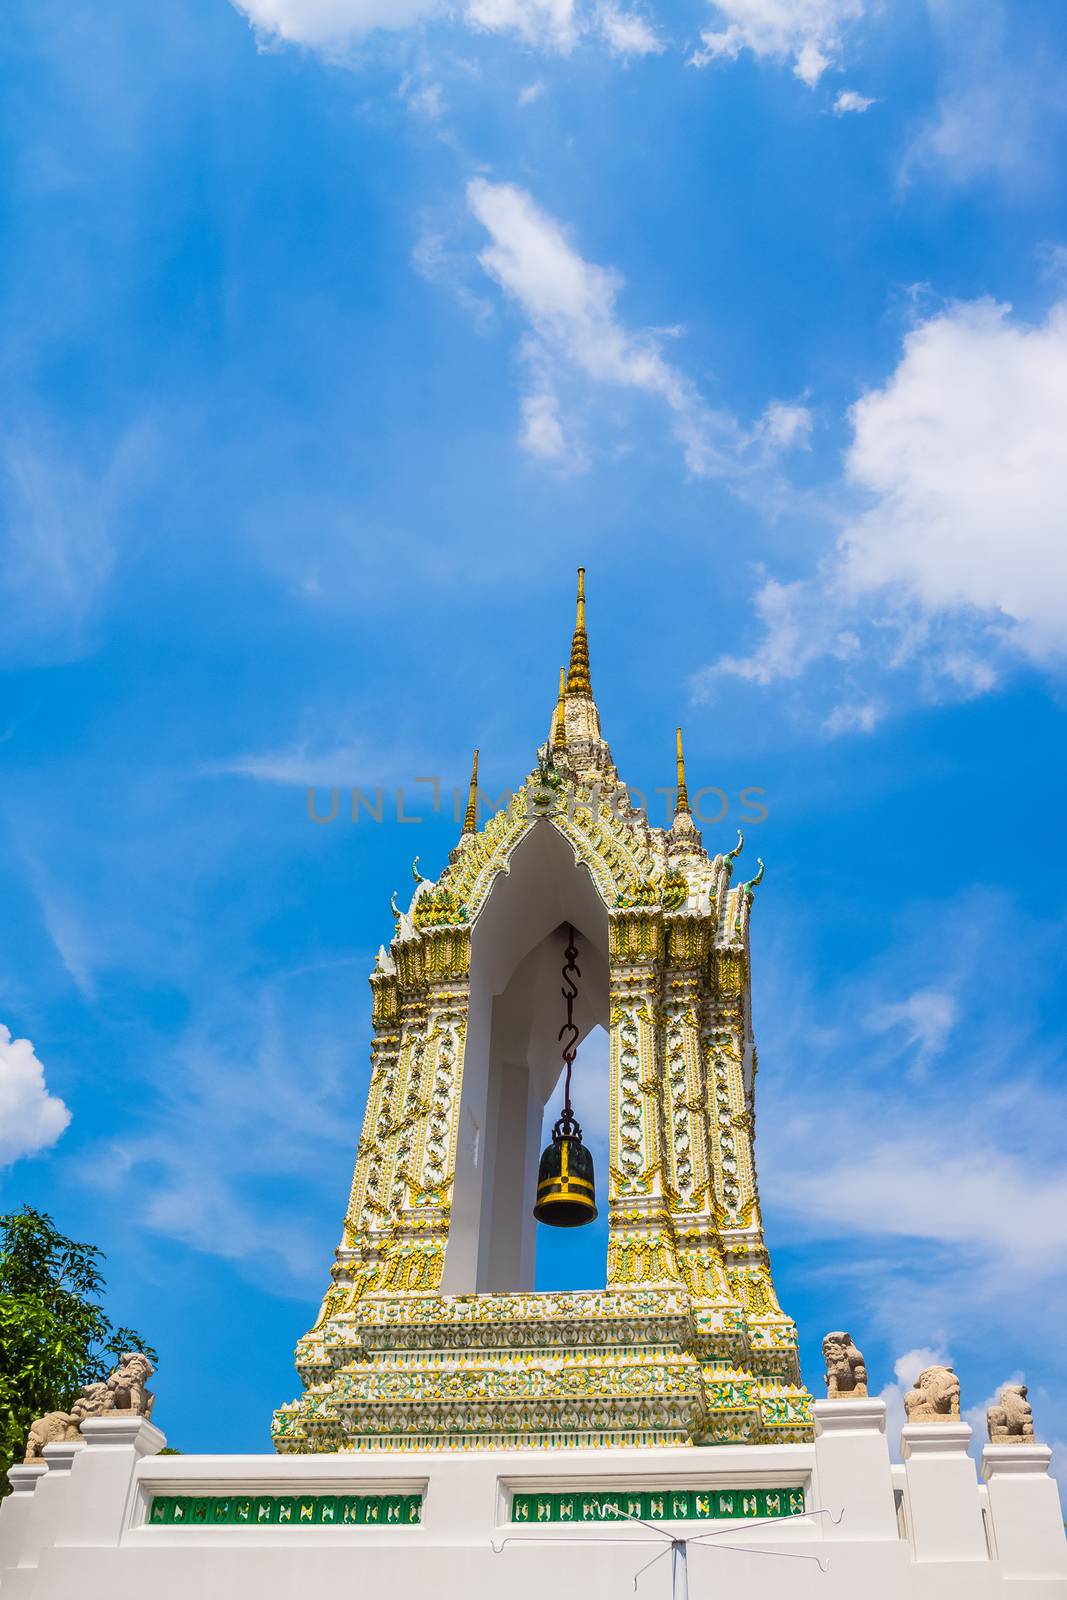 Belfry in the area of the Wat Pho, the Temple of the Reclining Buddha in Bangkok, Thailand.